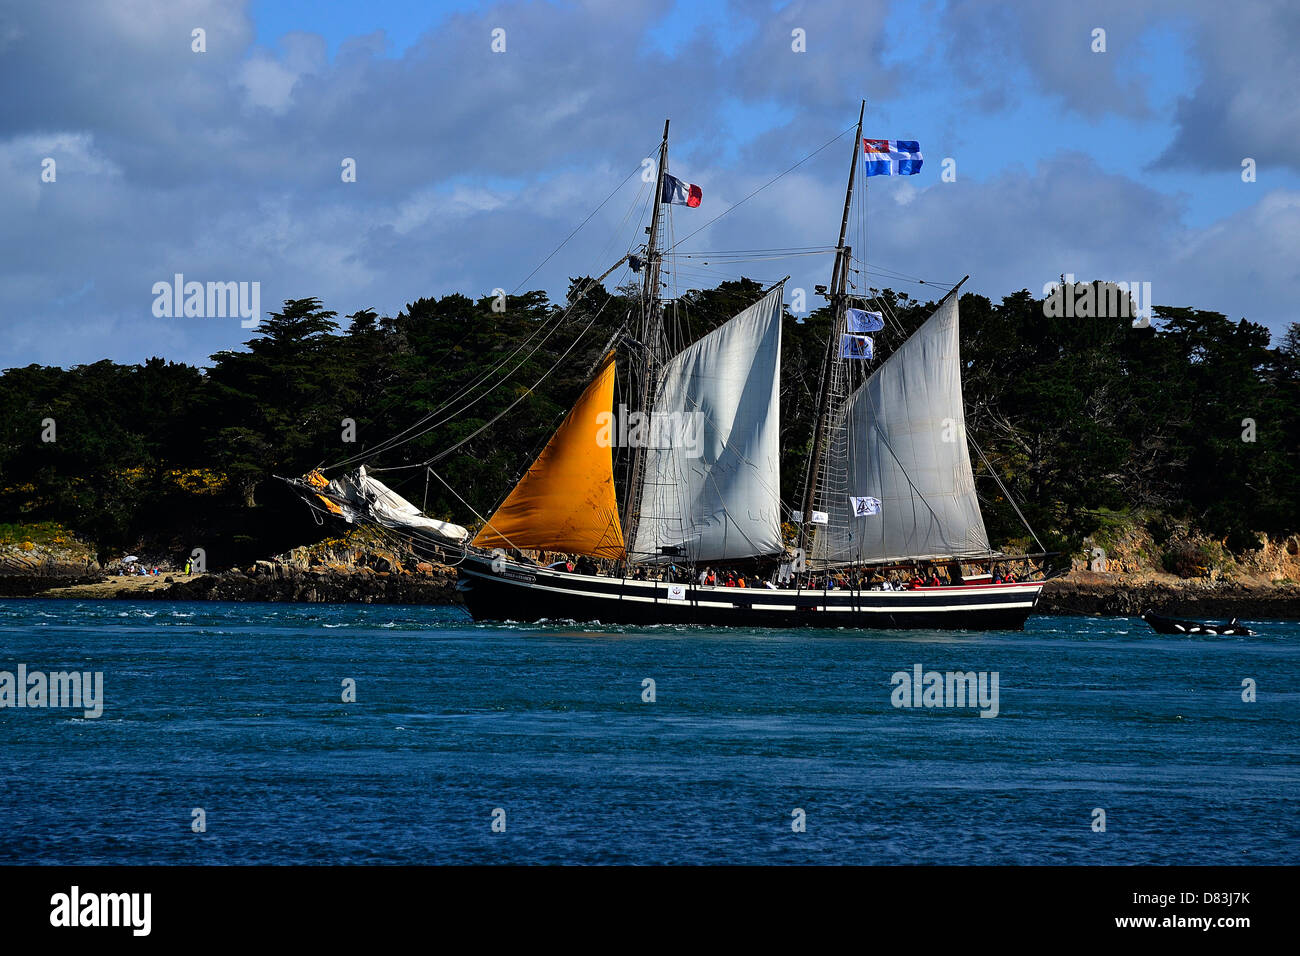 Etoile de France : topsail schooner with wooden hull, built in 1938 as a freighter for the Baltic Sea (Baltic Trader). Stock Photo